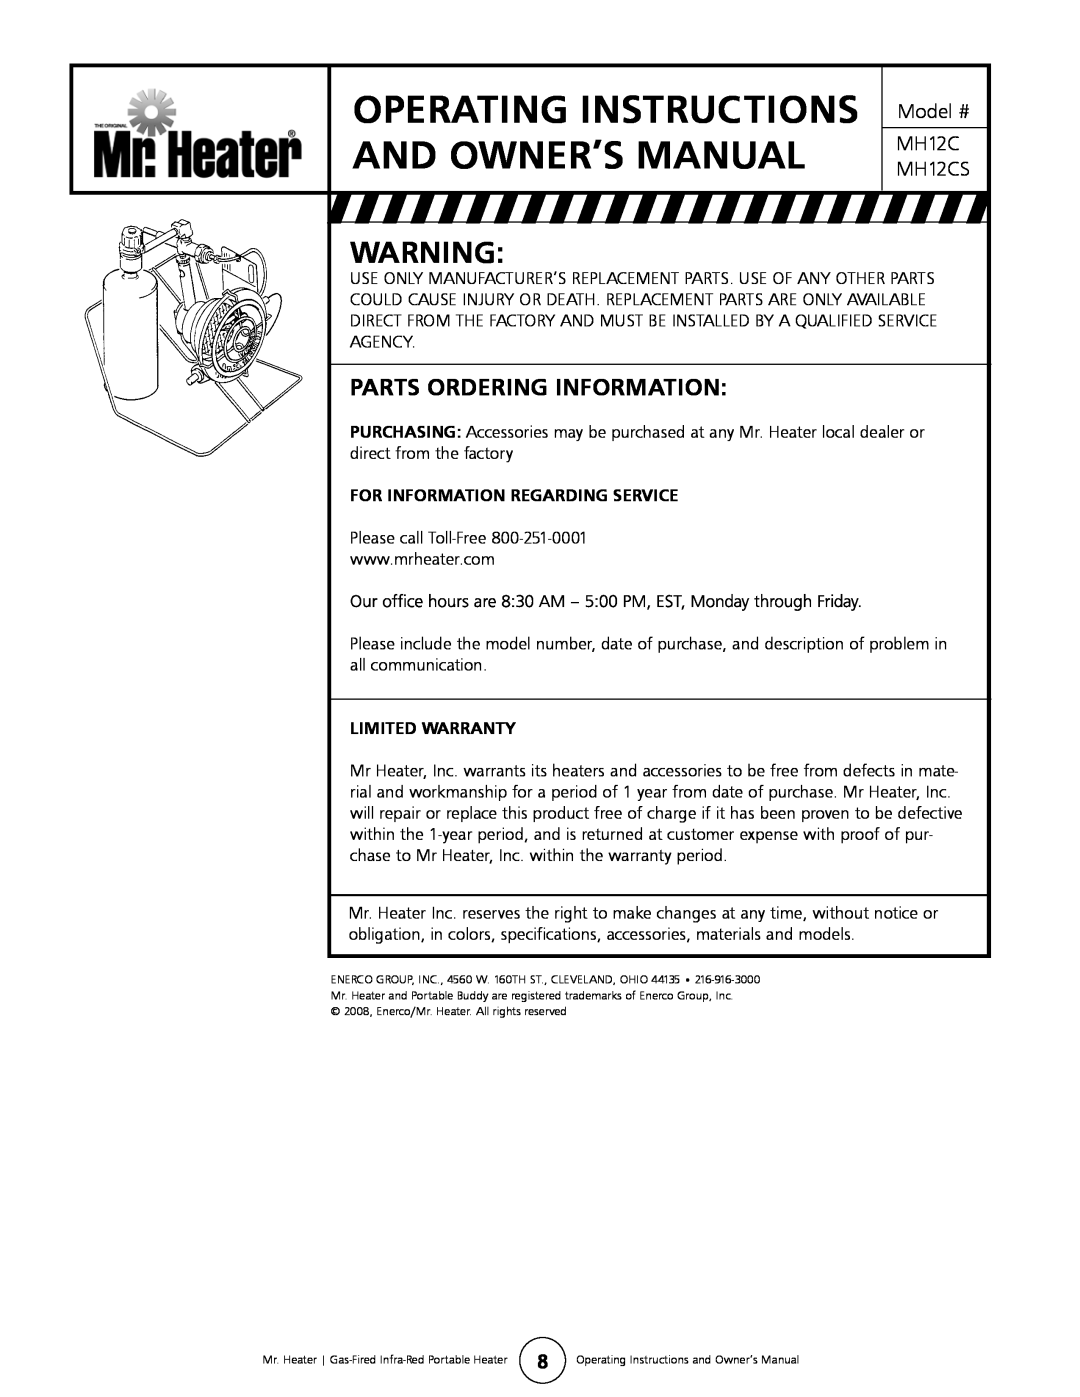 Mr. Heater MH12CS owner manual Parts Ordering Information, For Information Regarding Service, Limited Warranty 